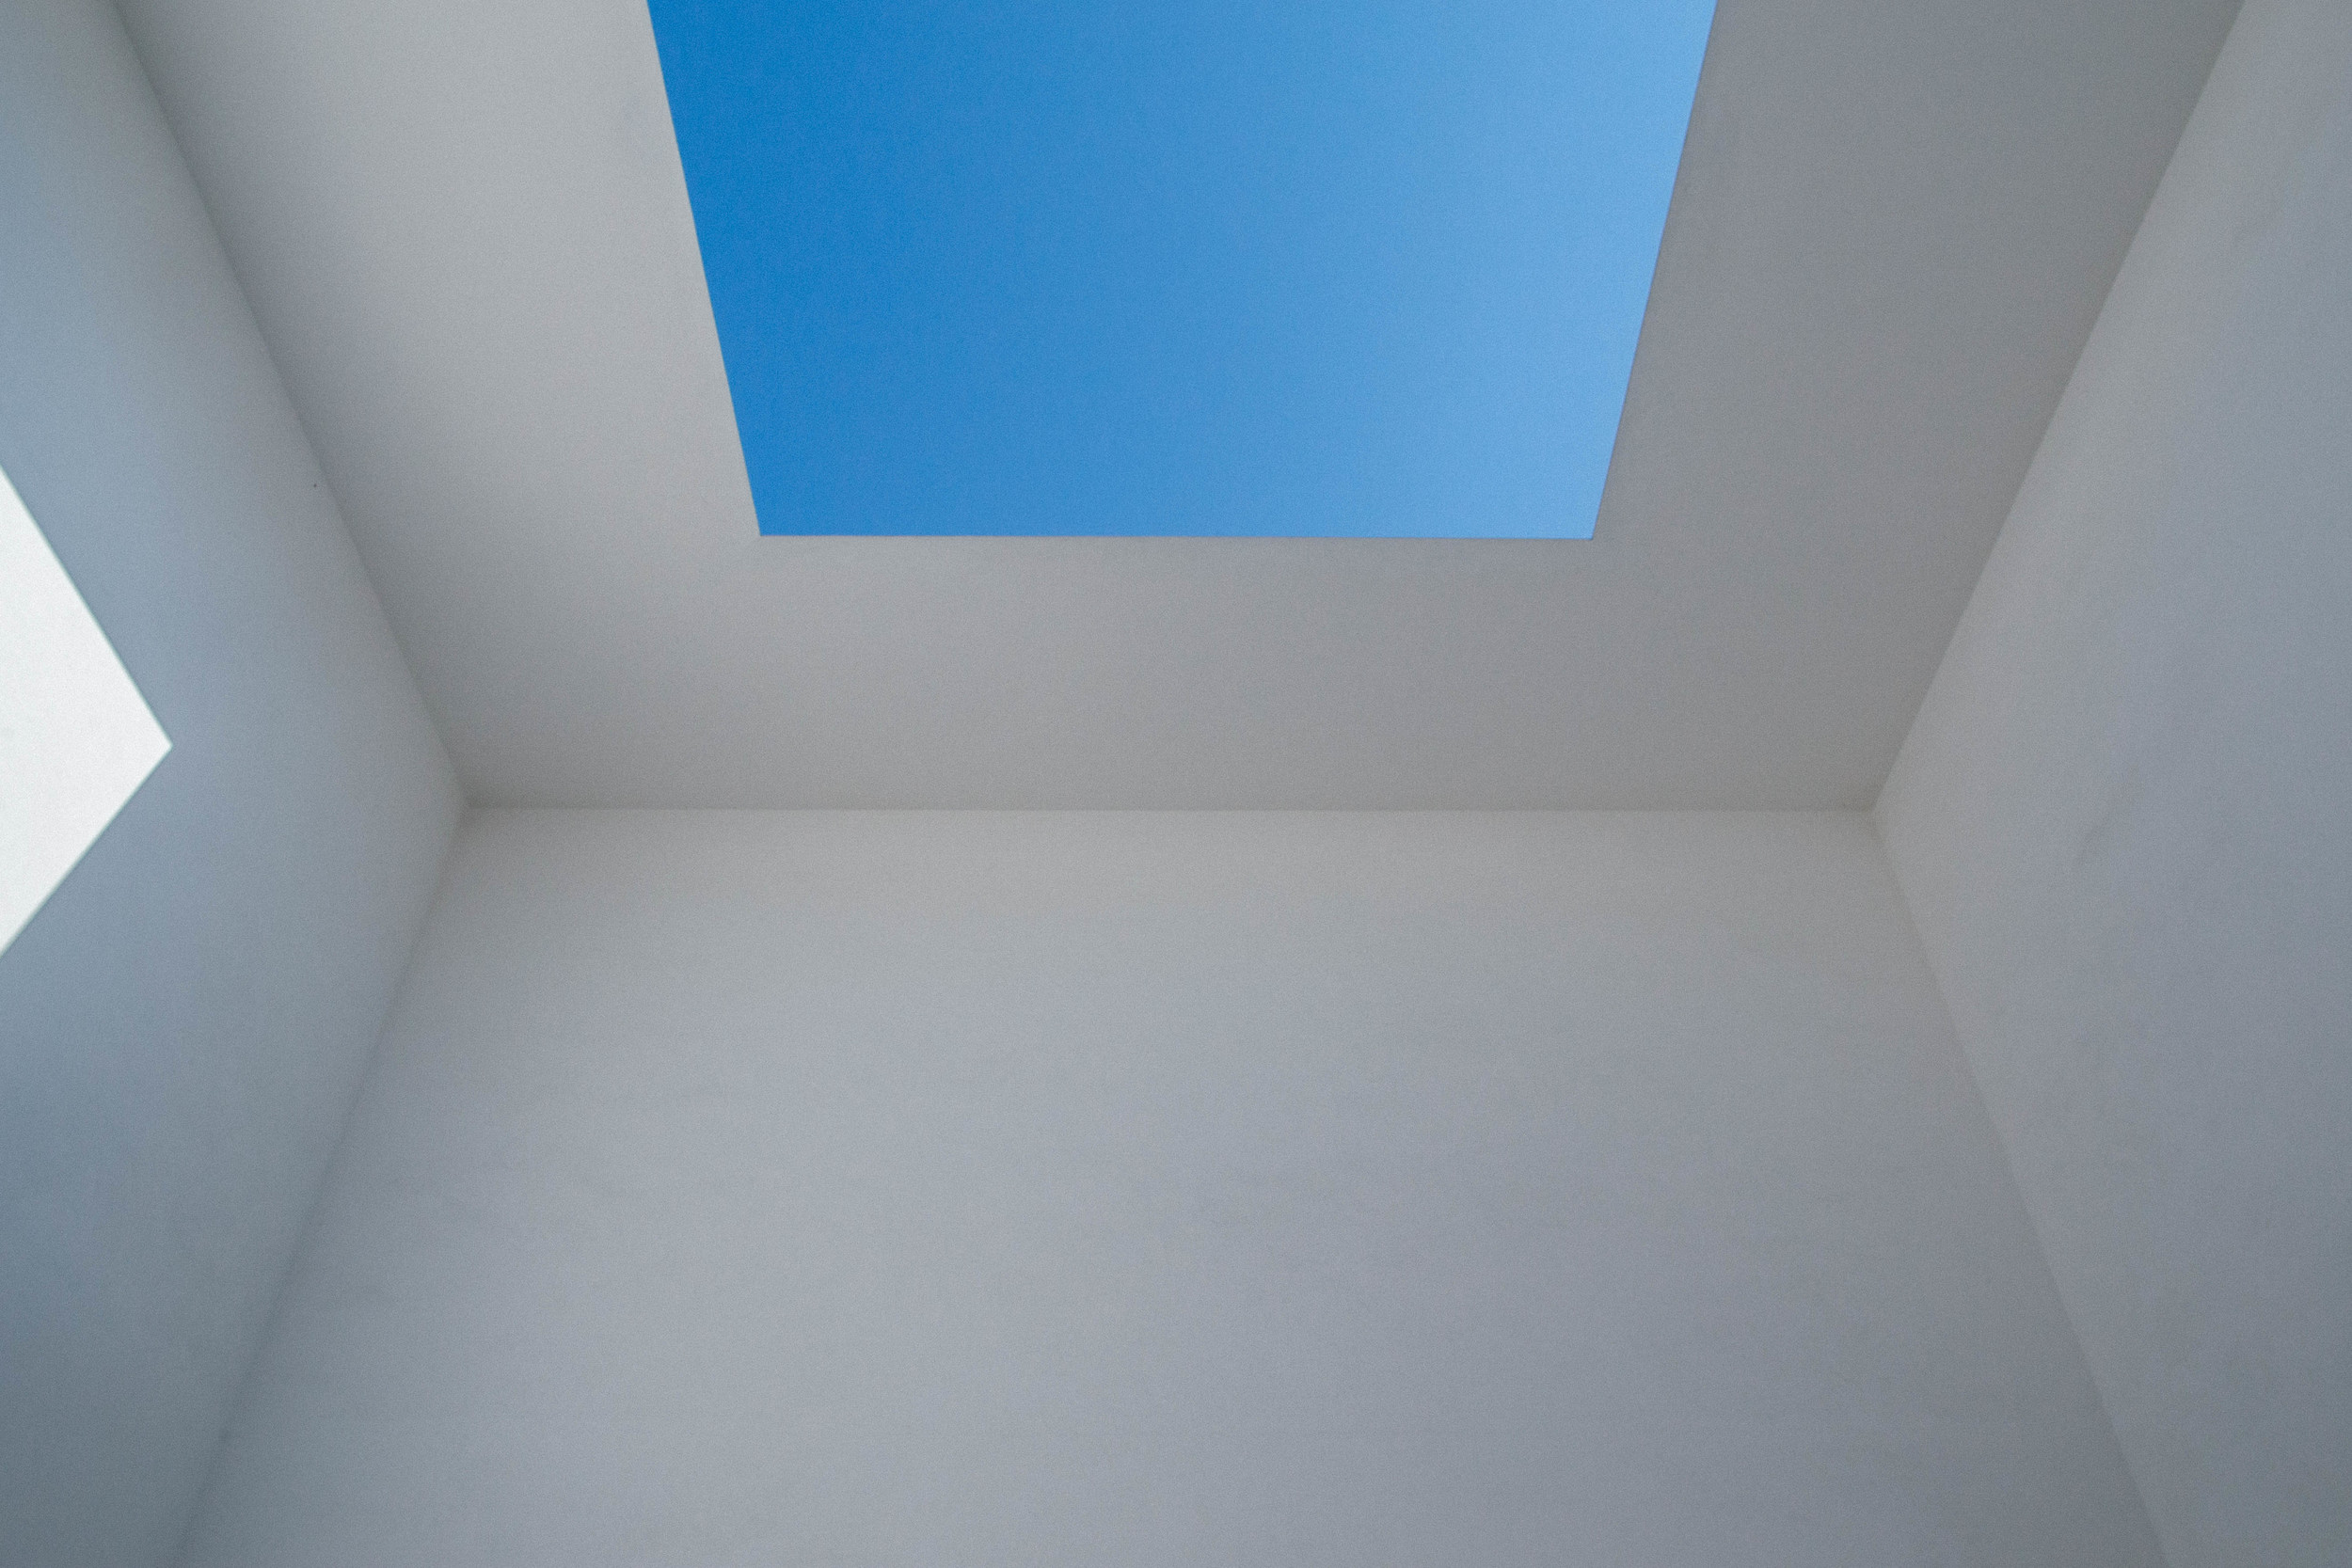  Open Sky by James Turrell 